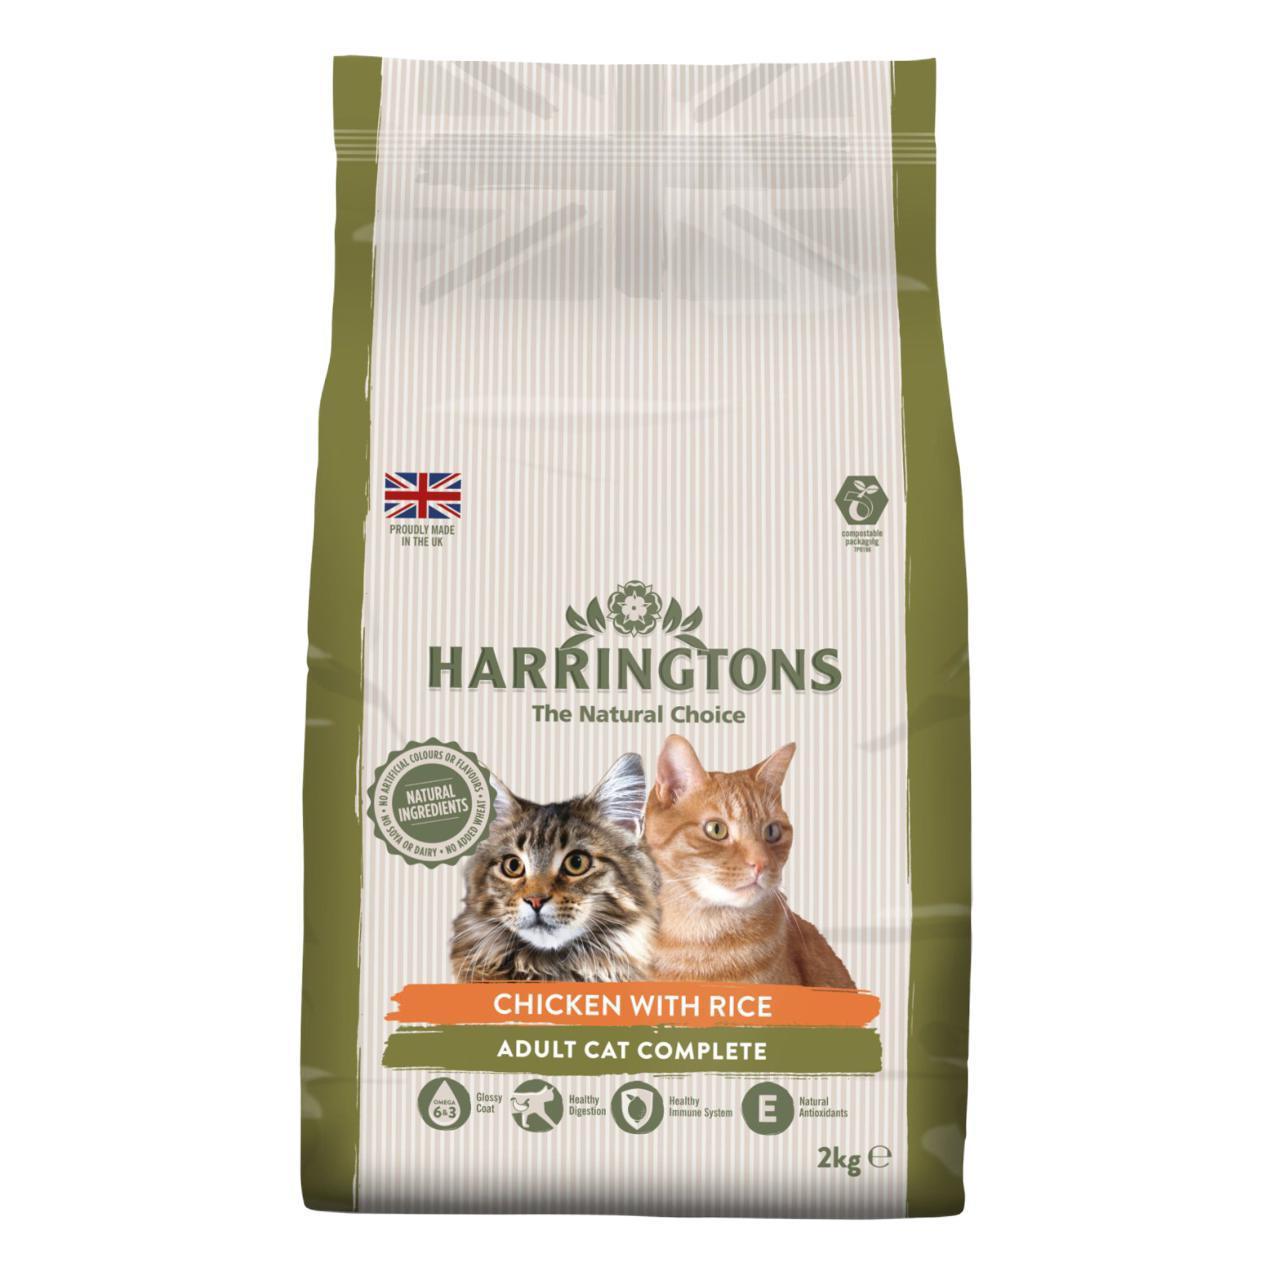 An image of Harringtons Cat Complete Chicken & Rice